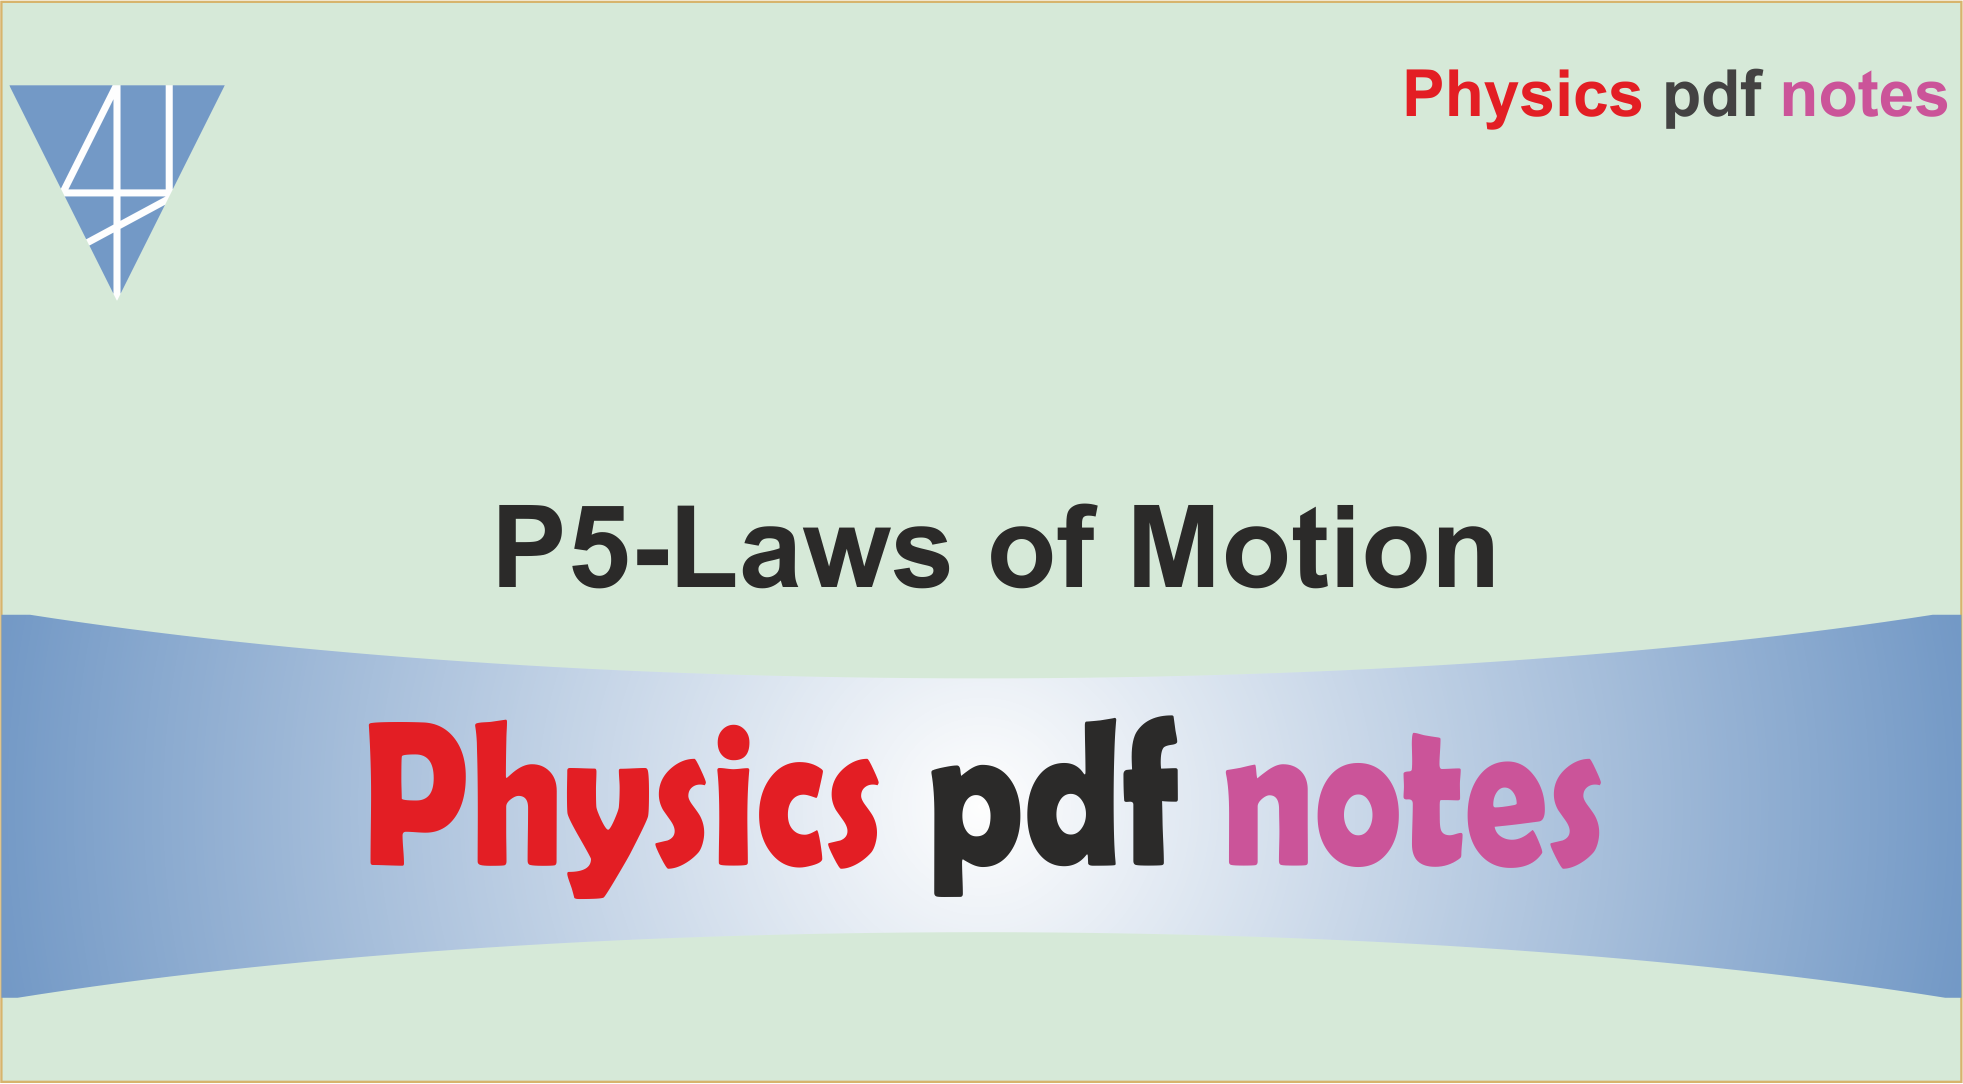 P5-Laws of Motion